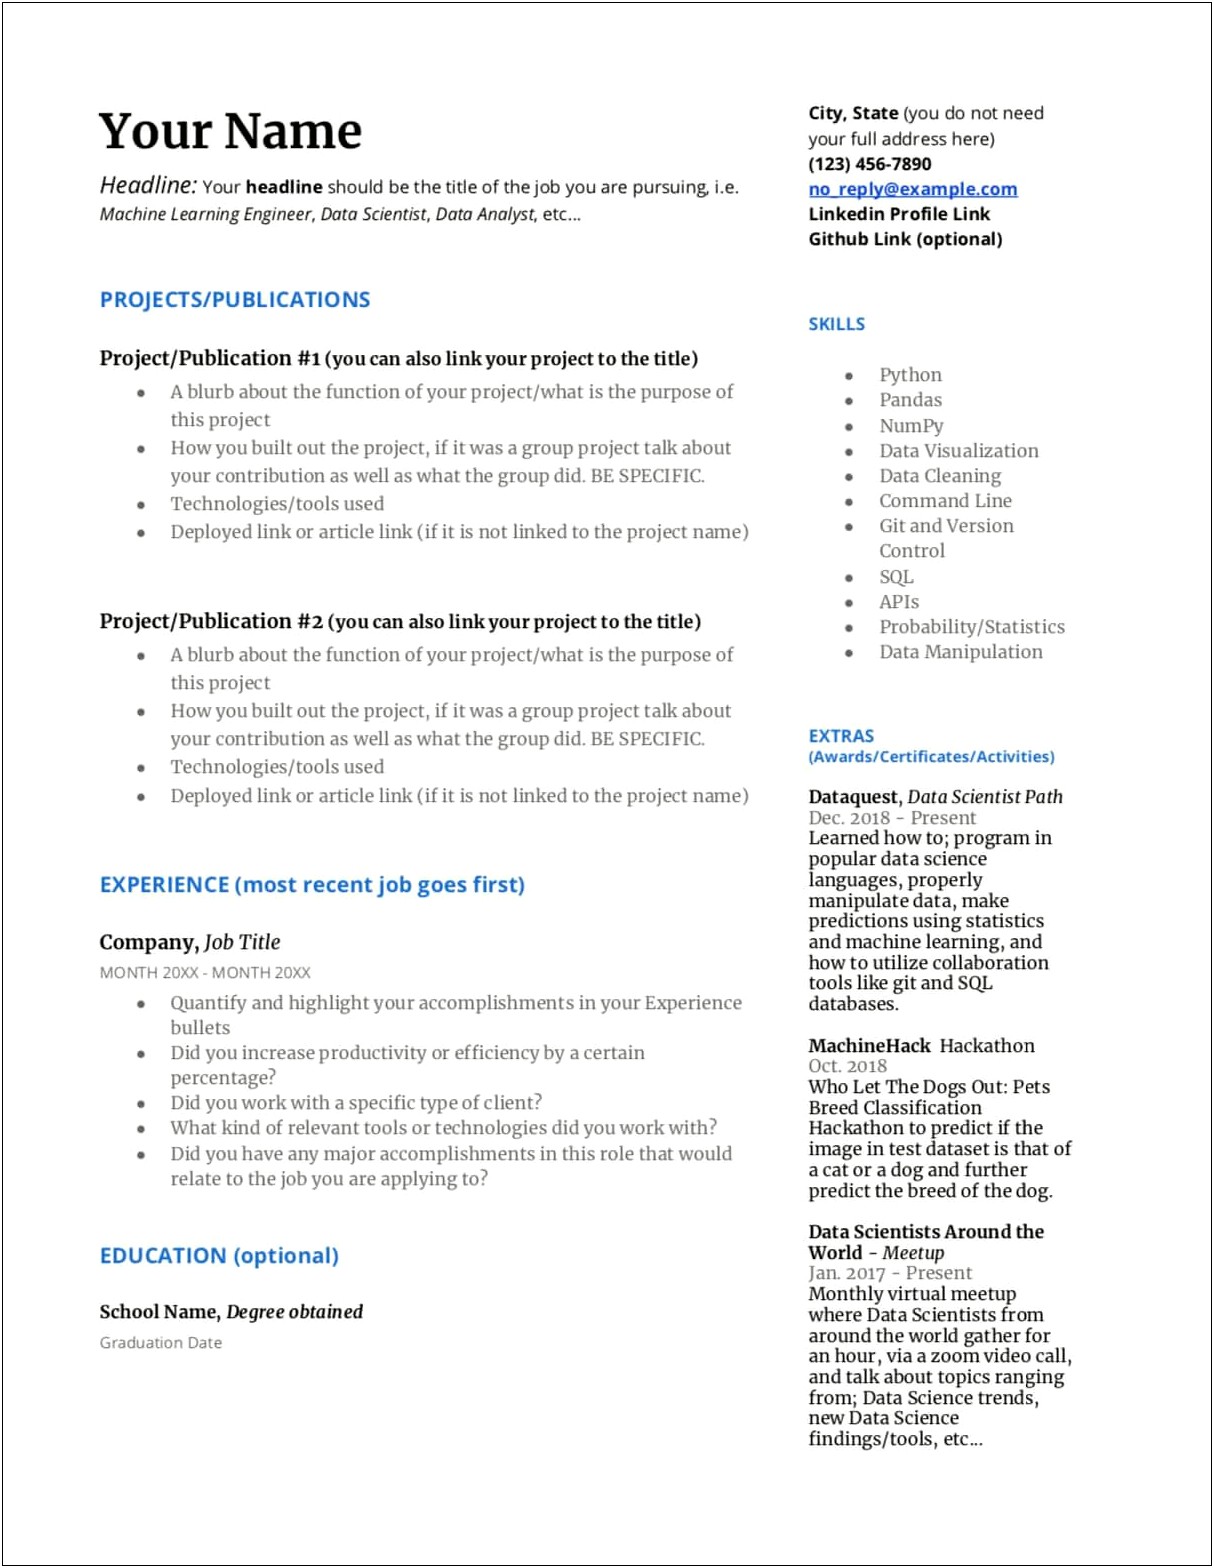 Best Professional Summary For Resume Low Experience